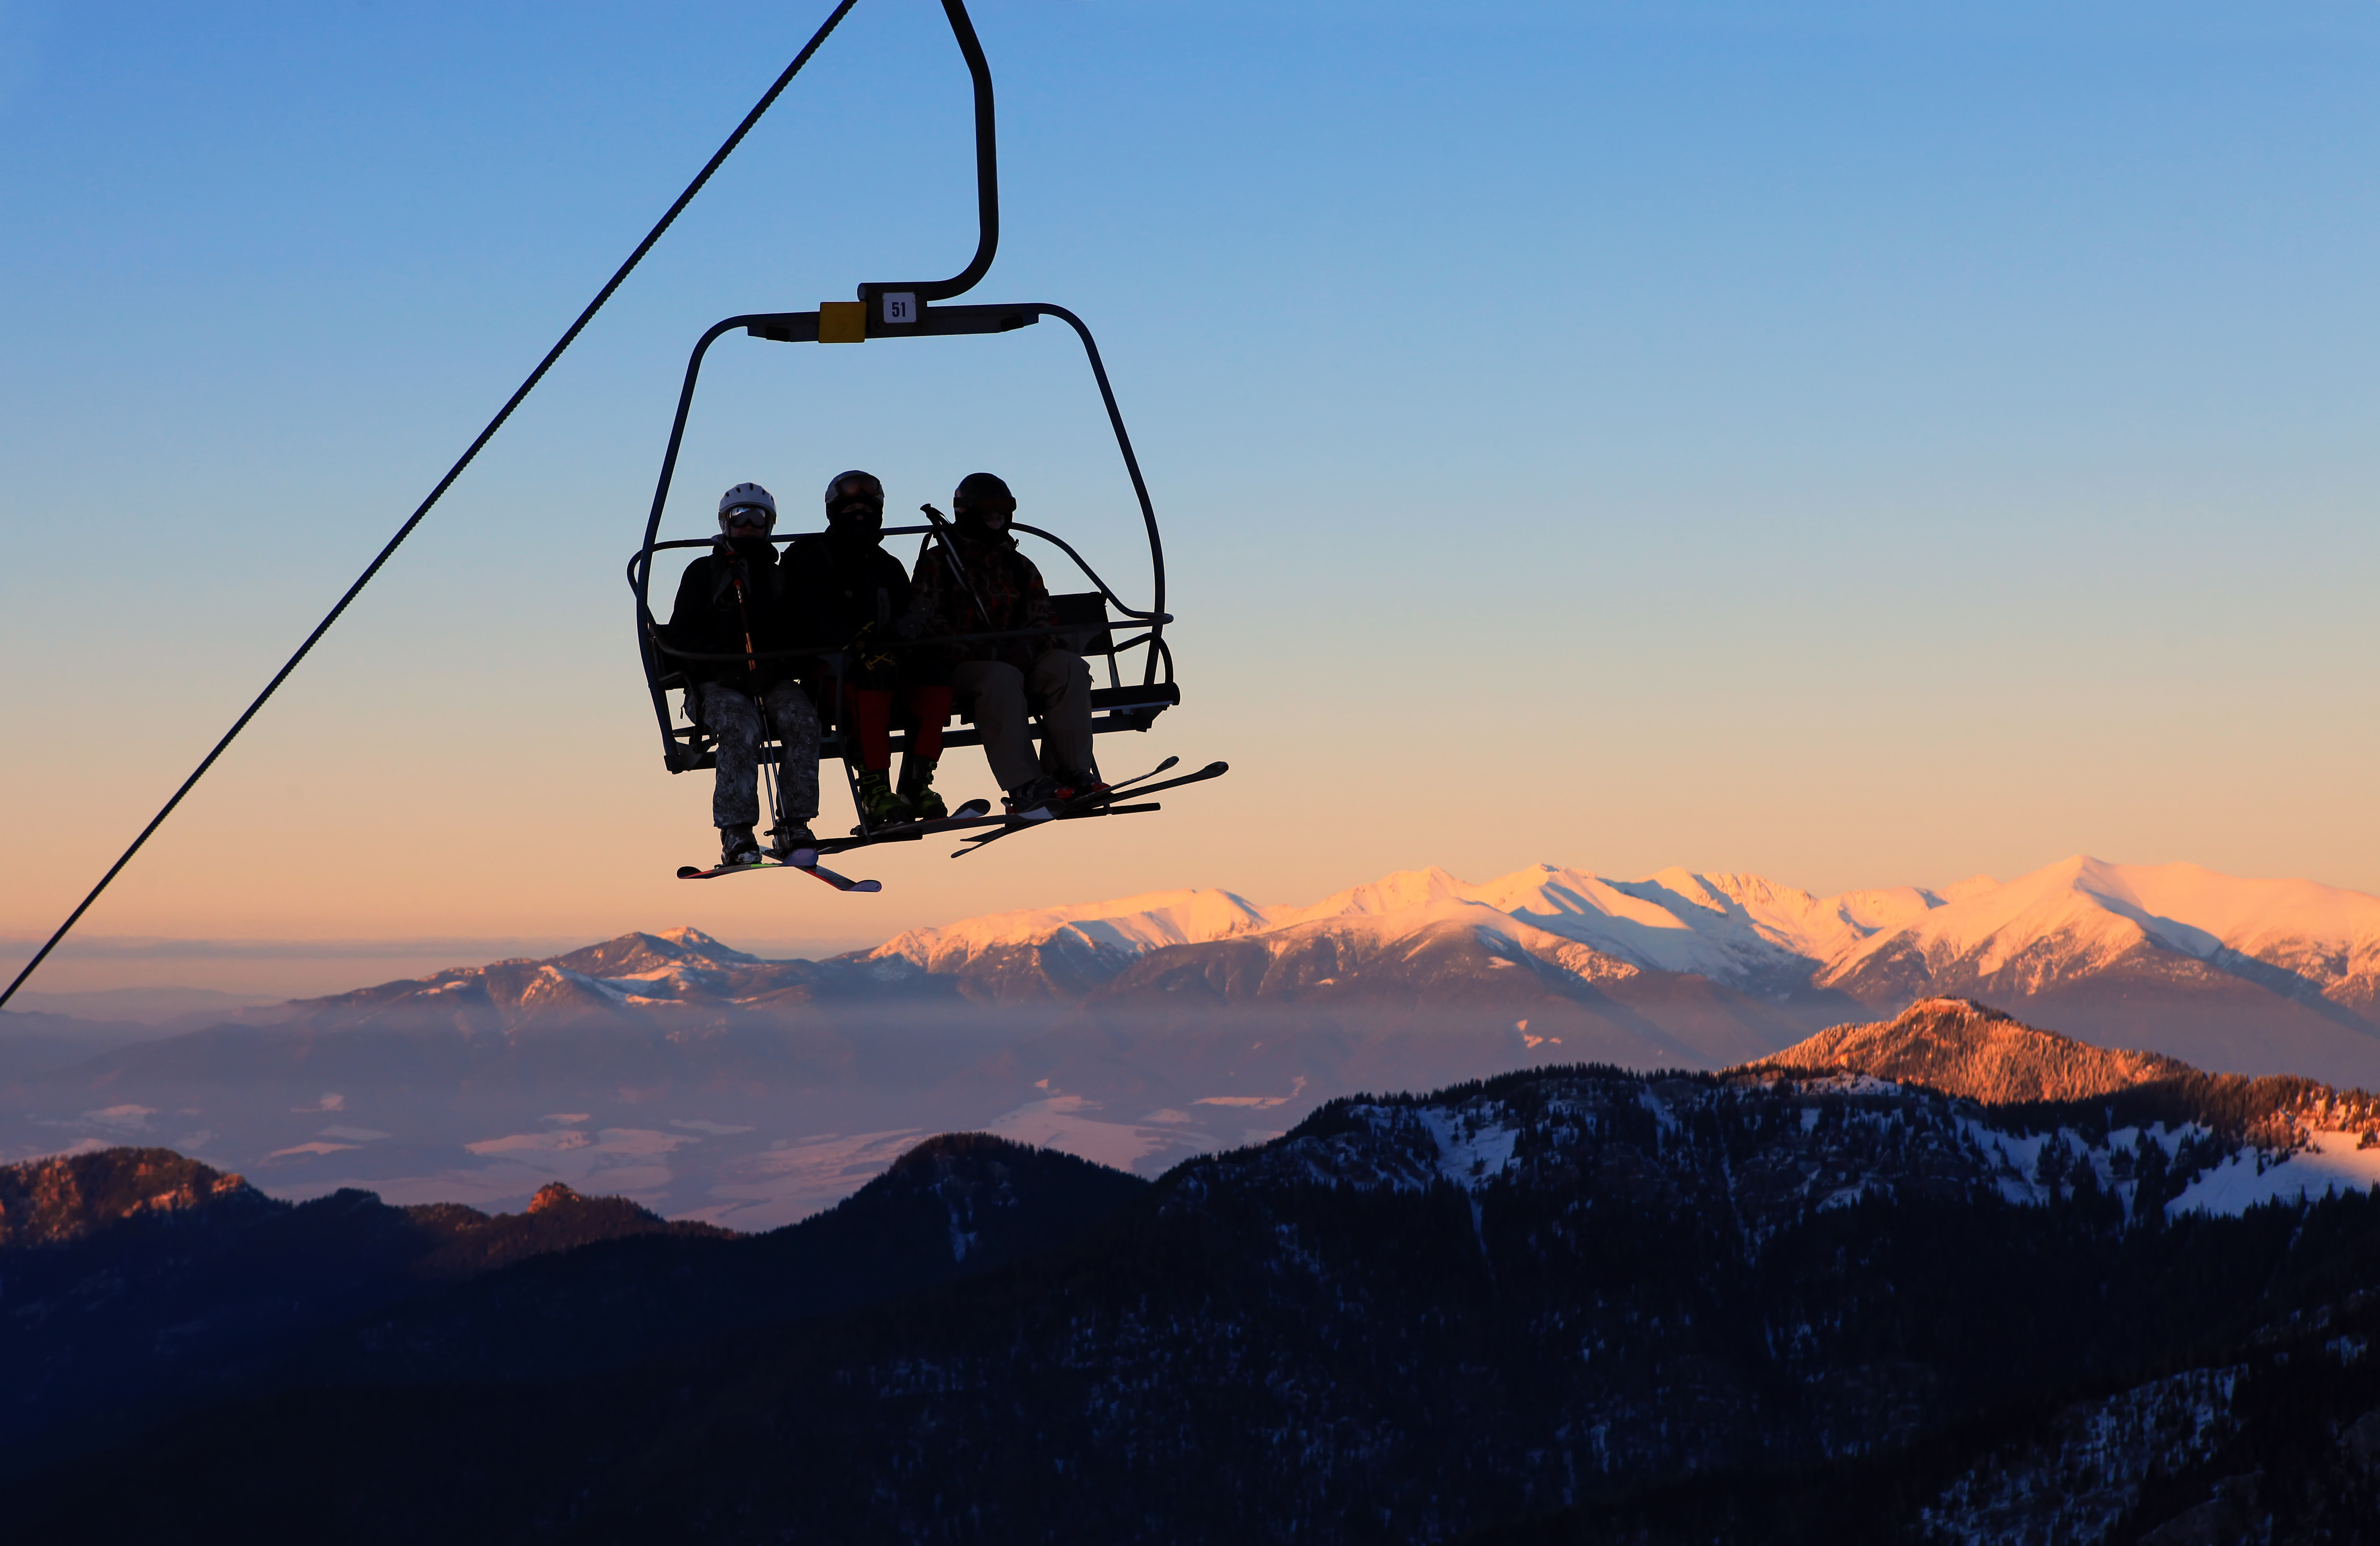 Silhouettes of three skiers on a ski-lift with mountains in the background. 